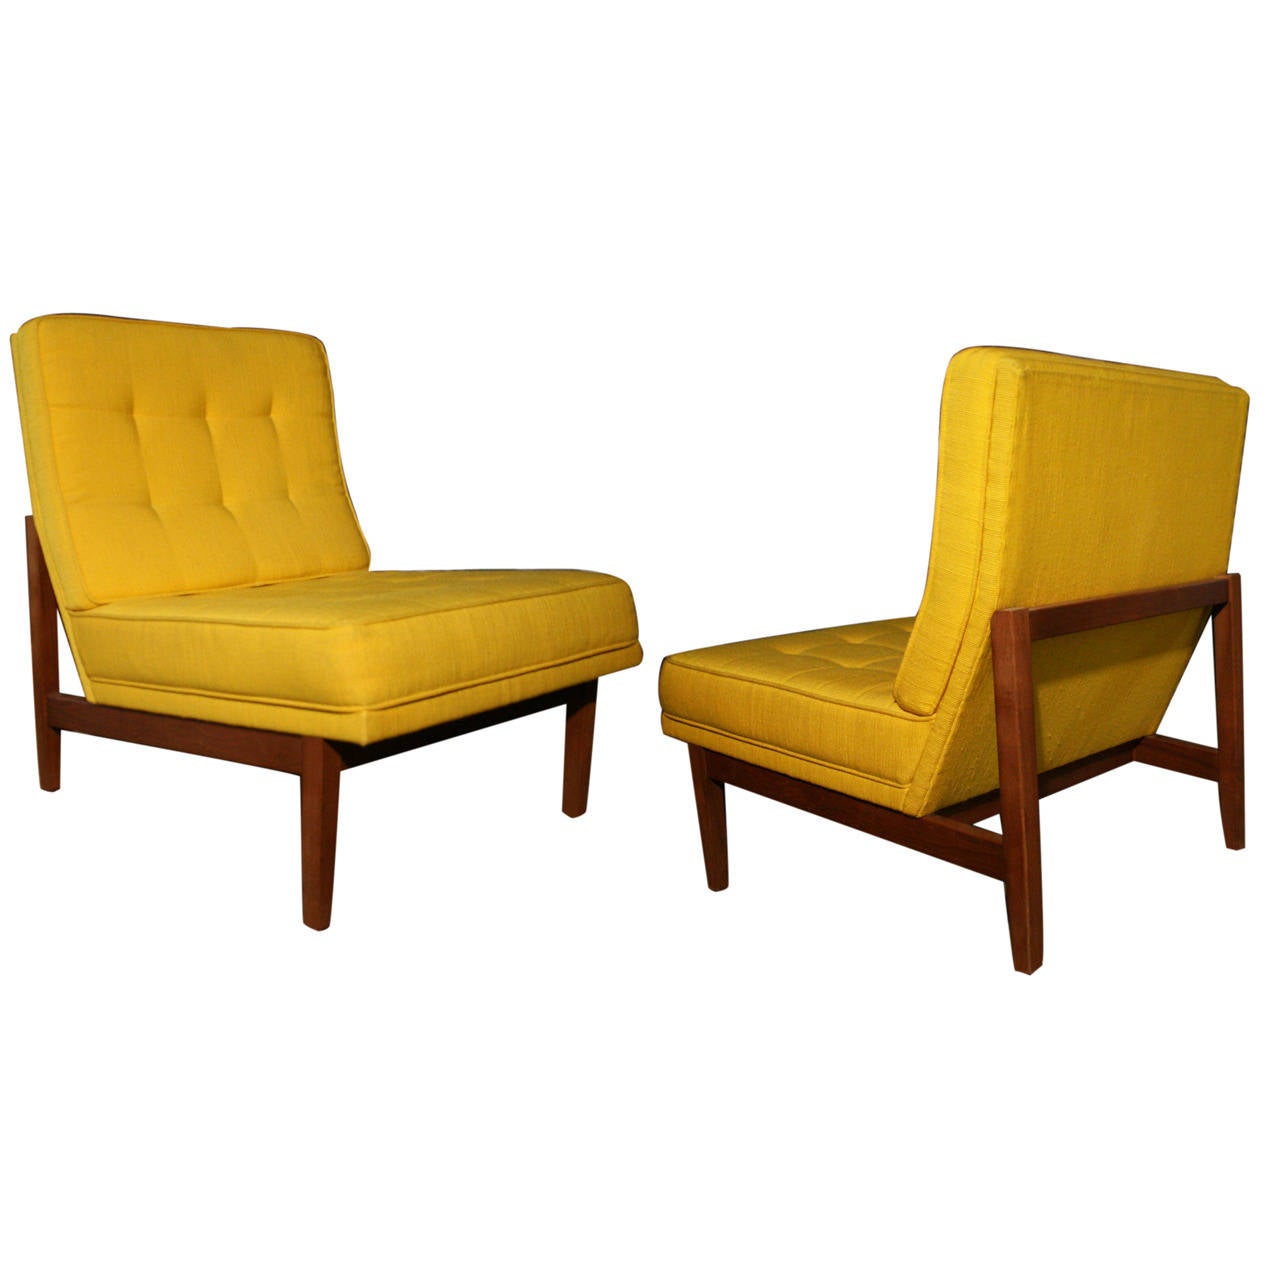 Pair of Knoll Armless Tufted Lounge Chairs on Wood Frame